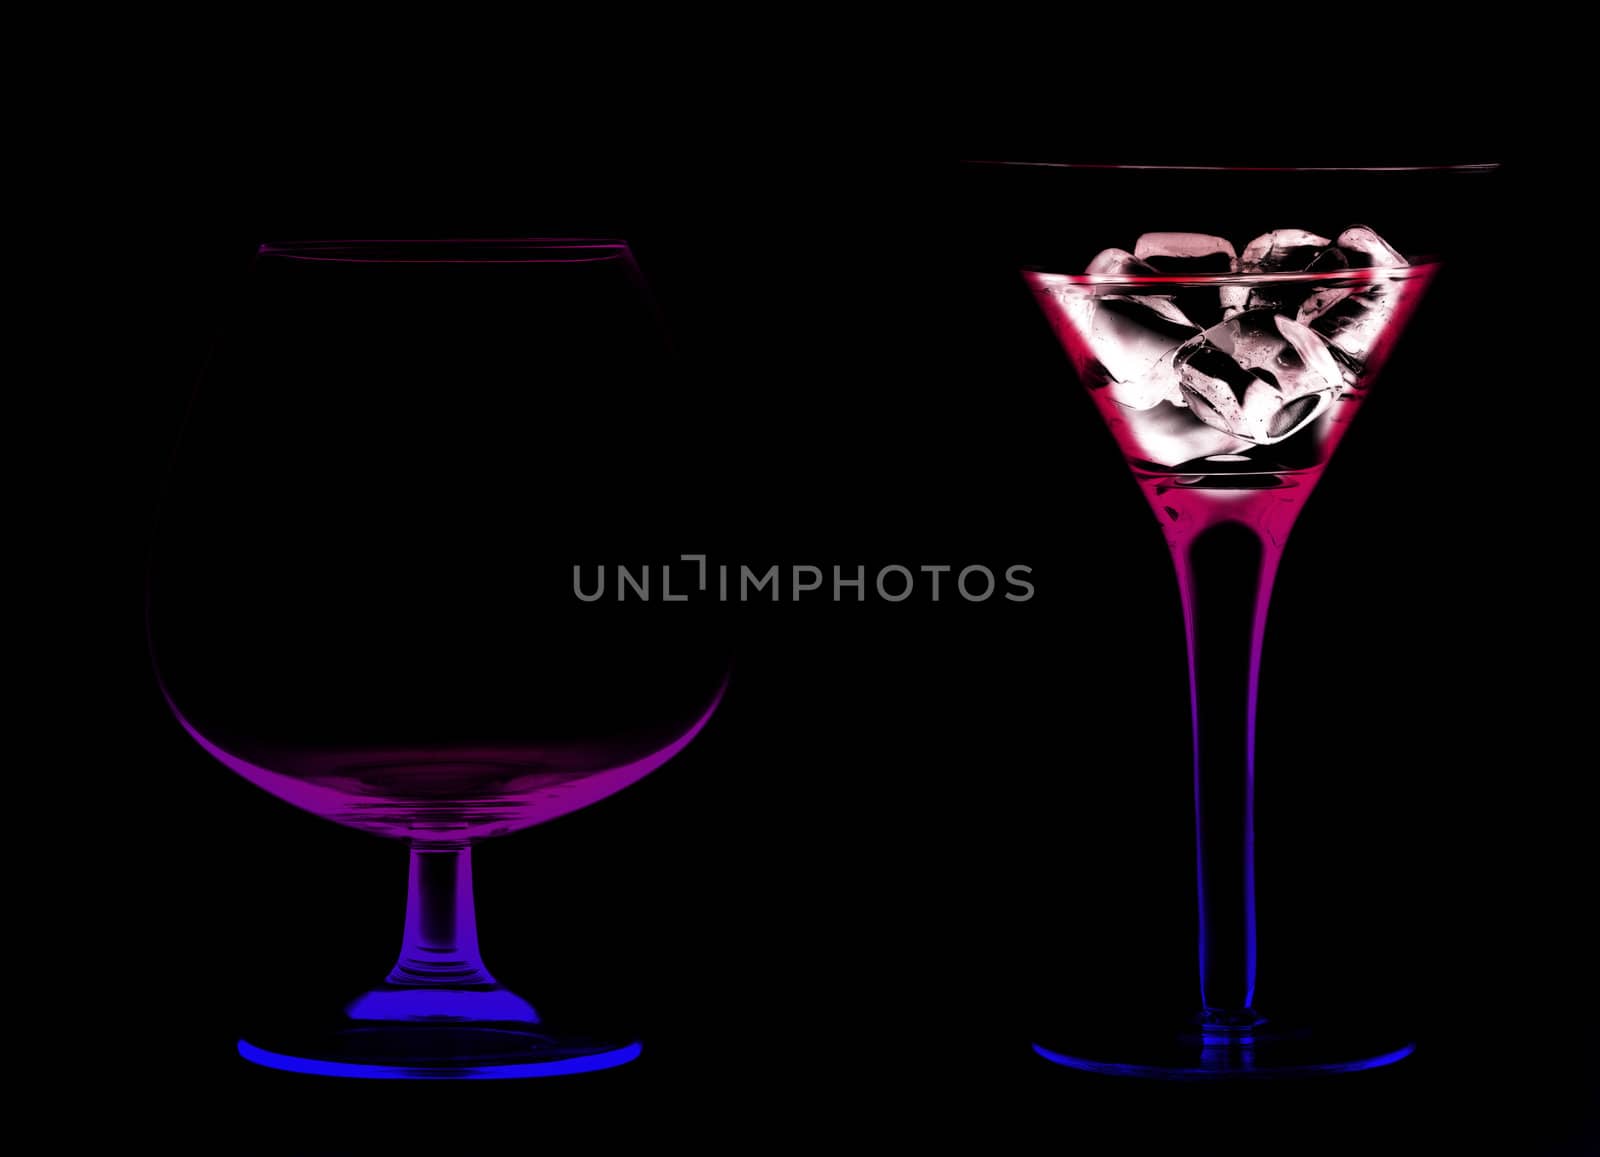 Wine Glasses with a cocktail and ice on a black background